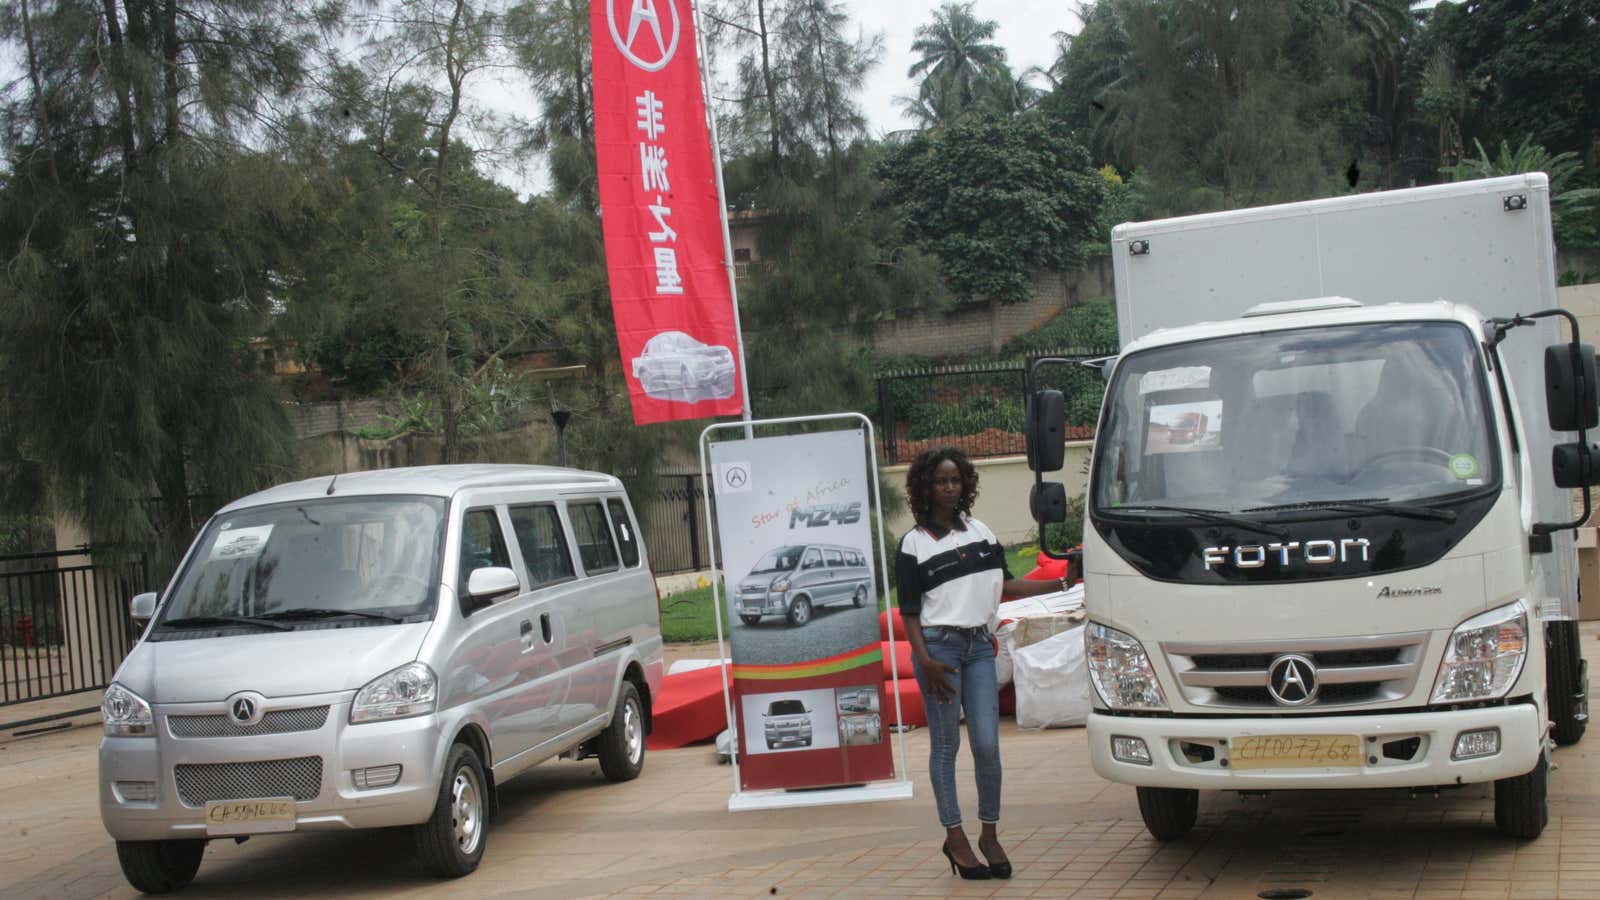 Star of Africa cars on display in Yaounde, Cameroon.